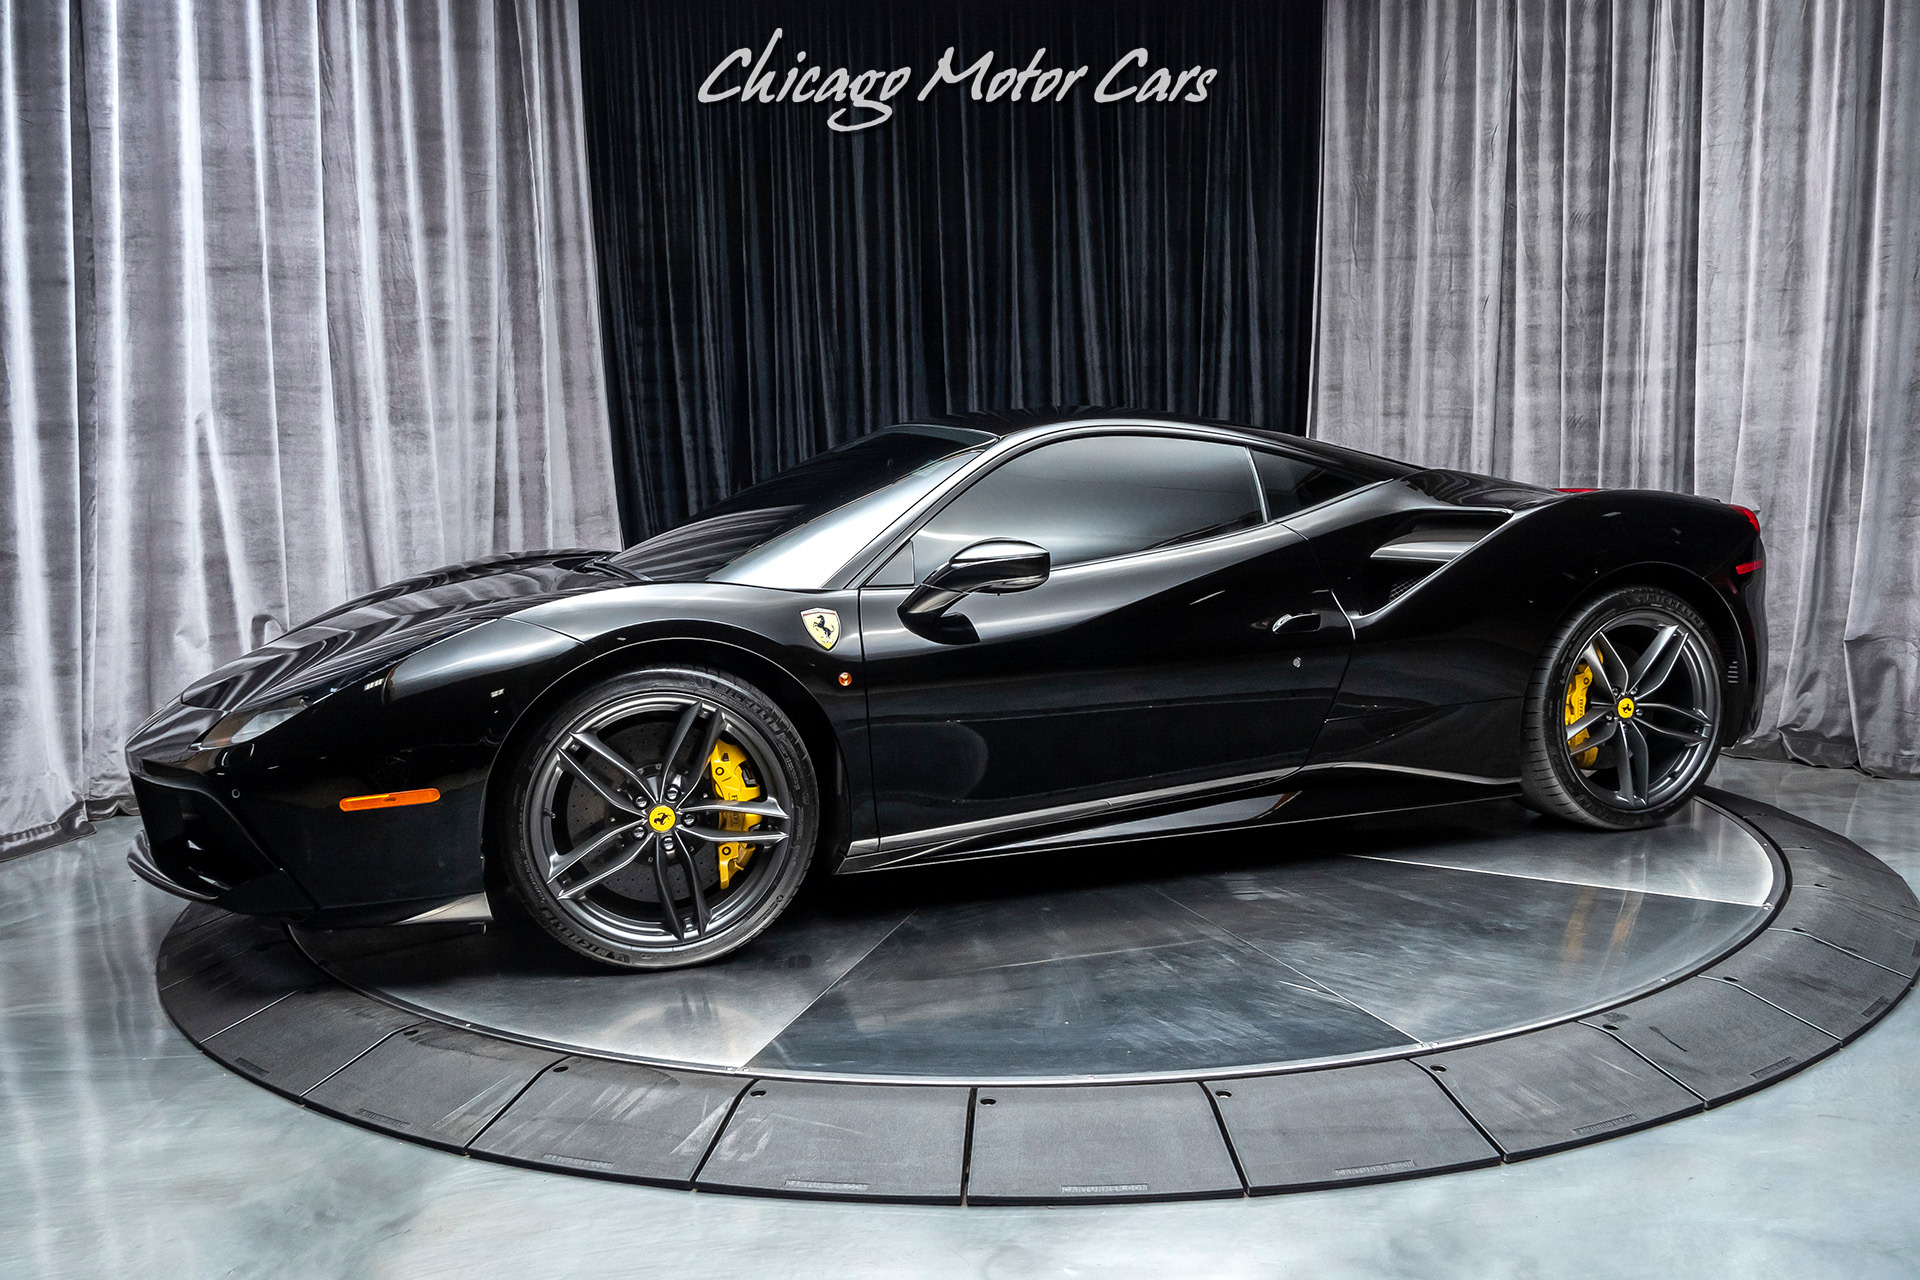 Used 2016 Ferrari 488 Gtb For Sale Special Pricing